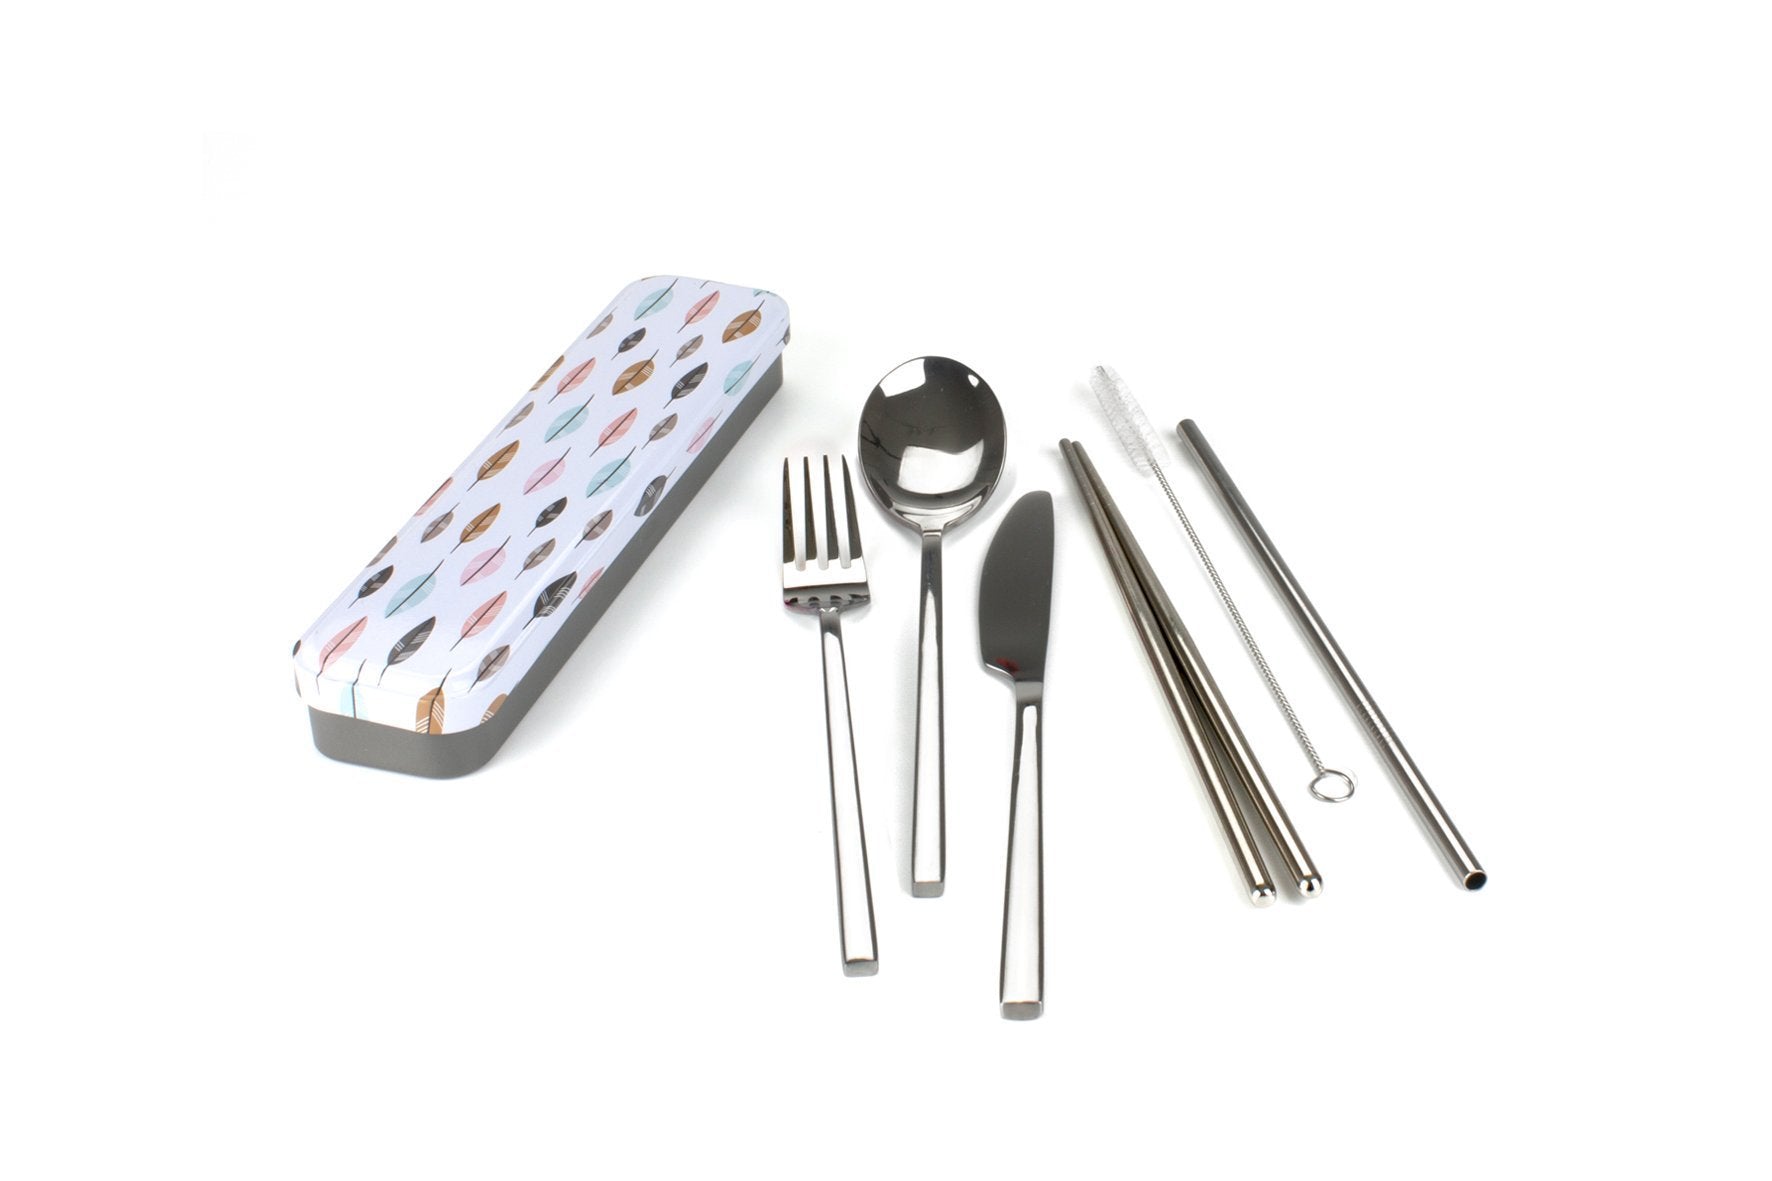 retro kitchen carry your cutlery - stainless steel cutlery set leaves